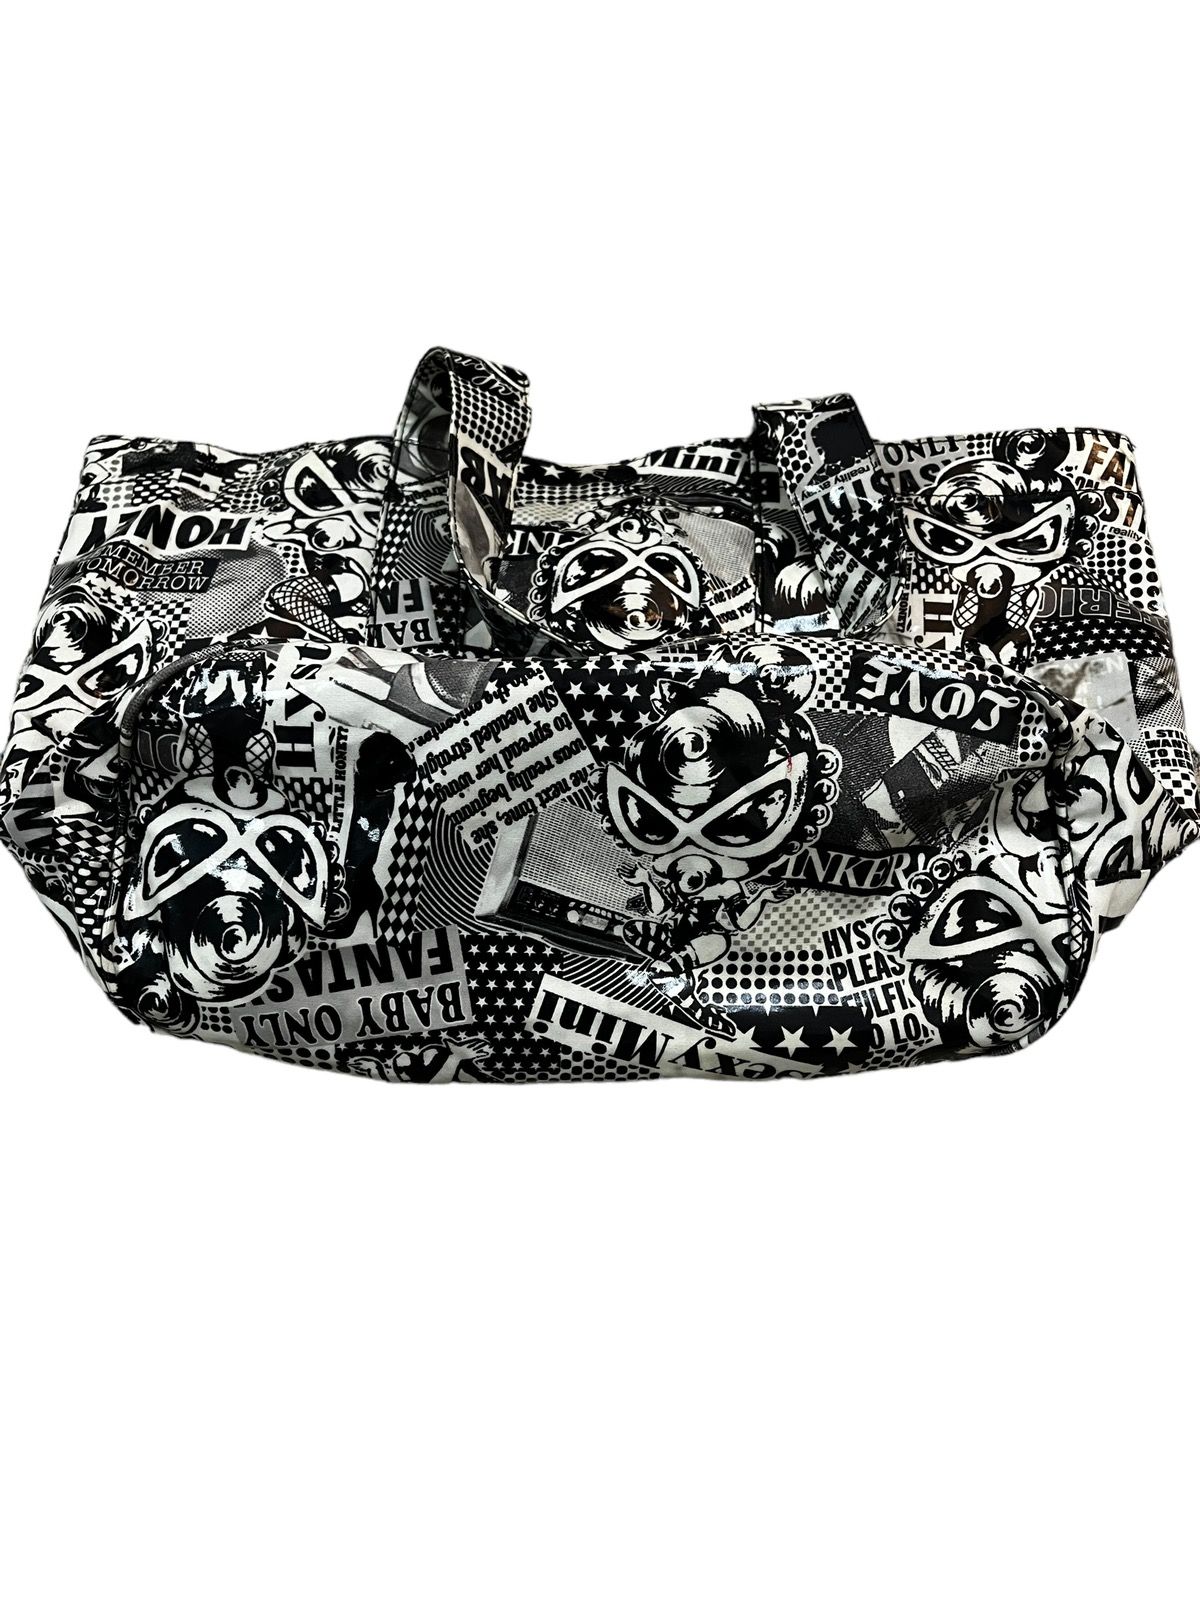 Hysteric Glamour Monochrome Bag - 7